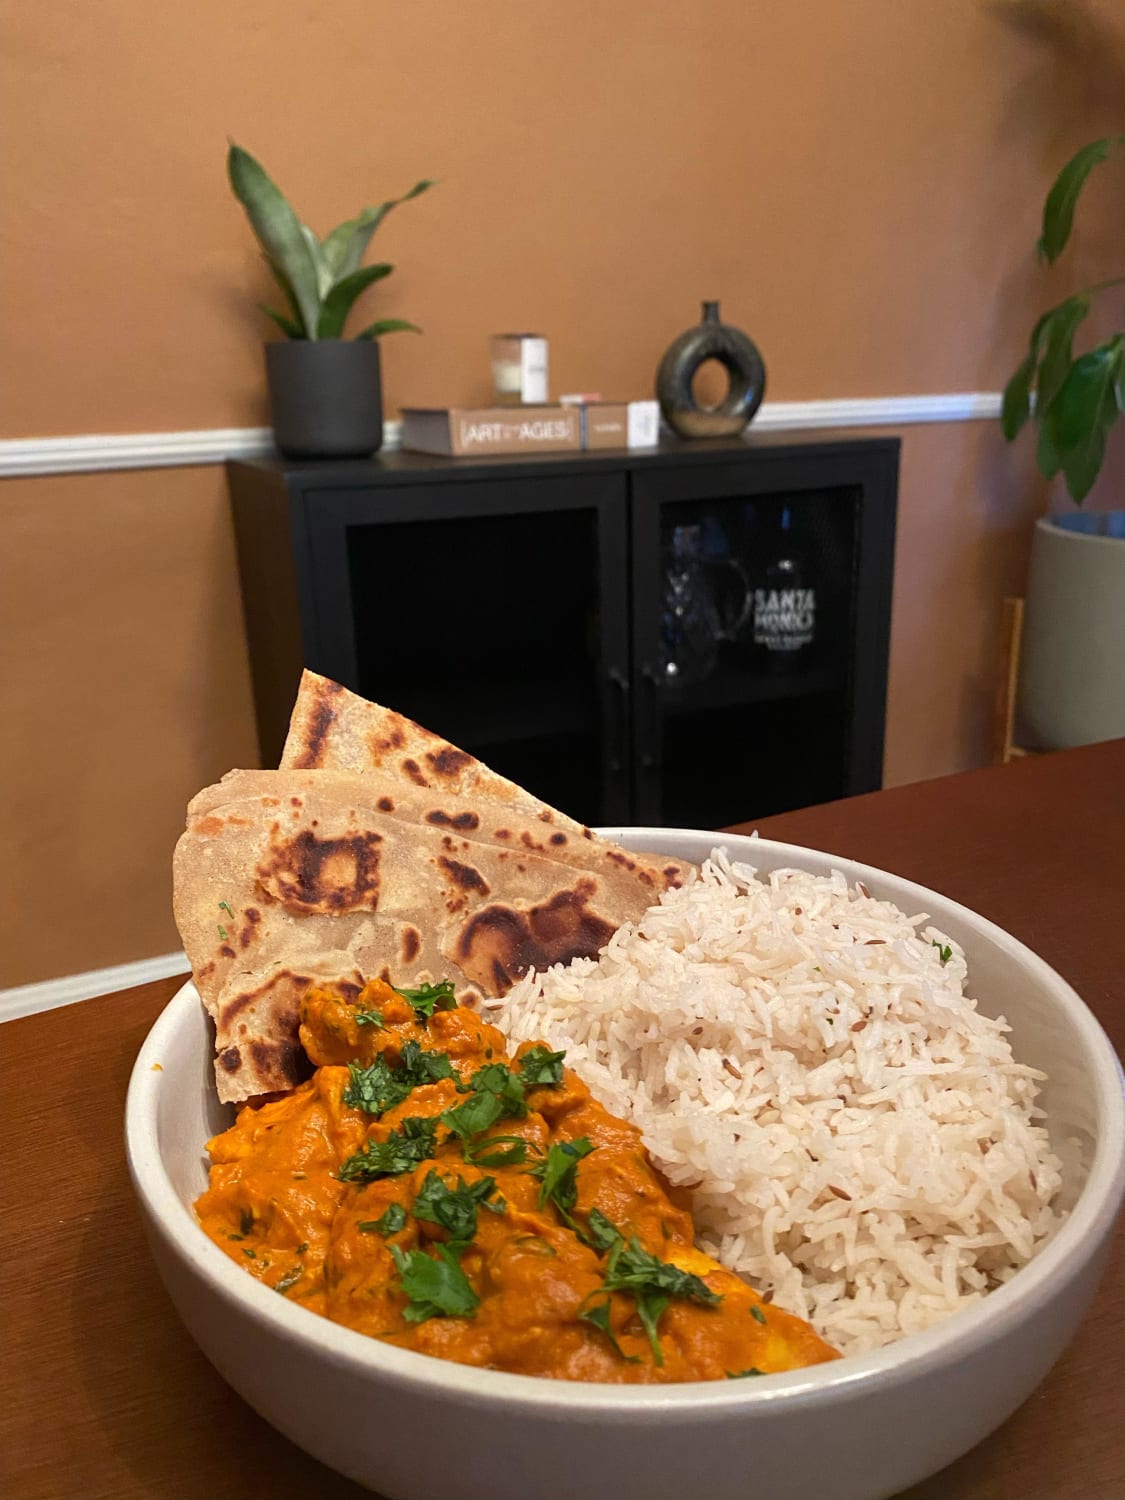 My boyfriend and I made Chicken Tikka Masala, cultivating the new passion of cooking has made as grow closer. If anyone wants the recipe, or cooking advice for the rice. I’d be glad to share! What do you think? It’s our first ☺️